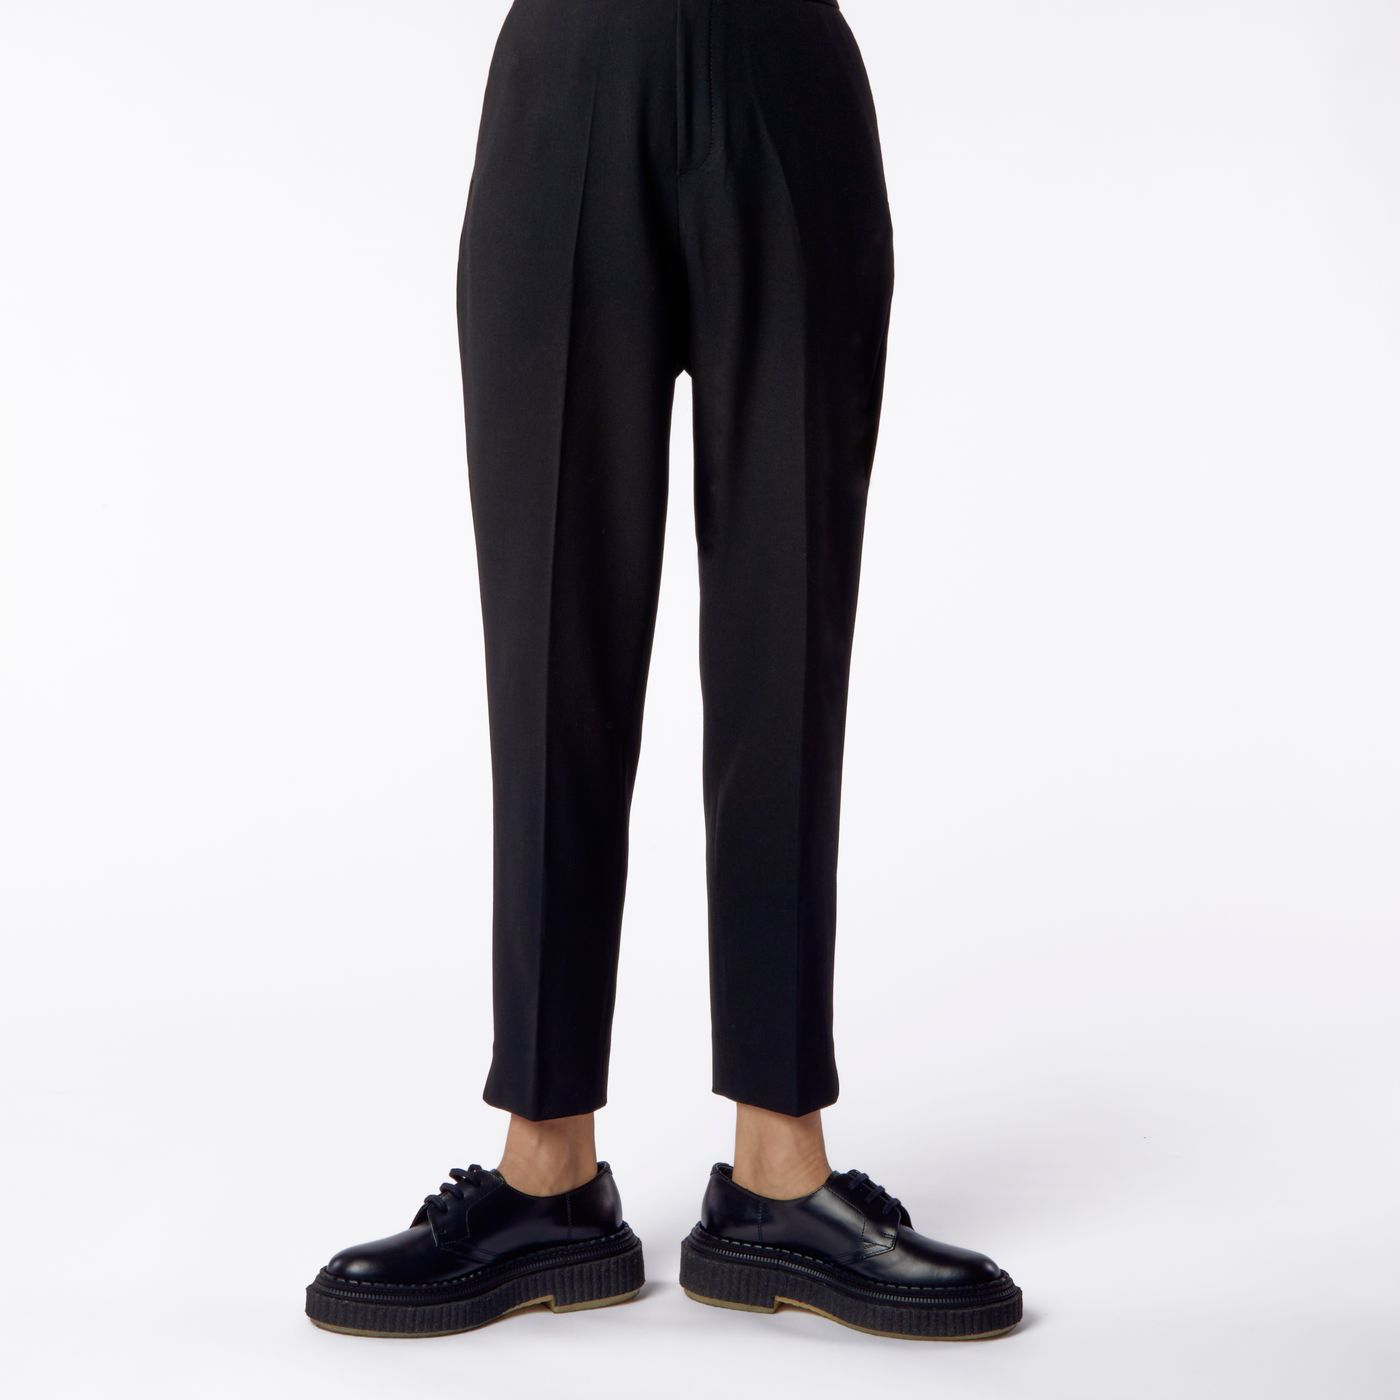 Where Can I Find the Perfect Pair of Black Pants  The New York Times